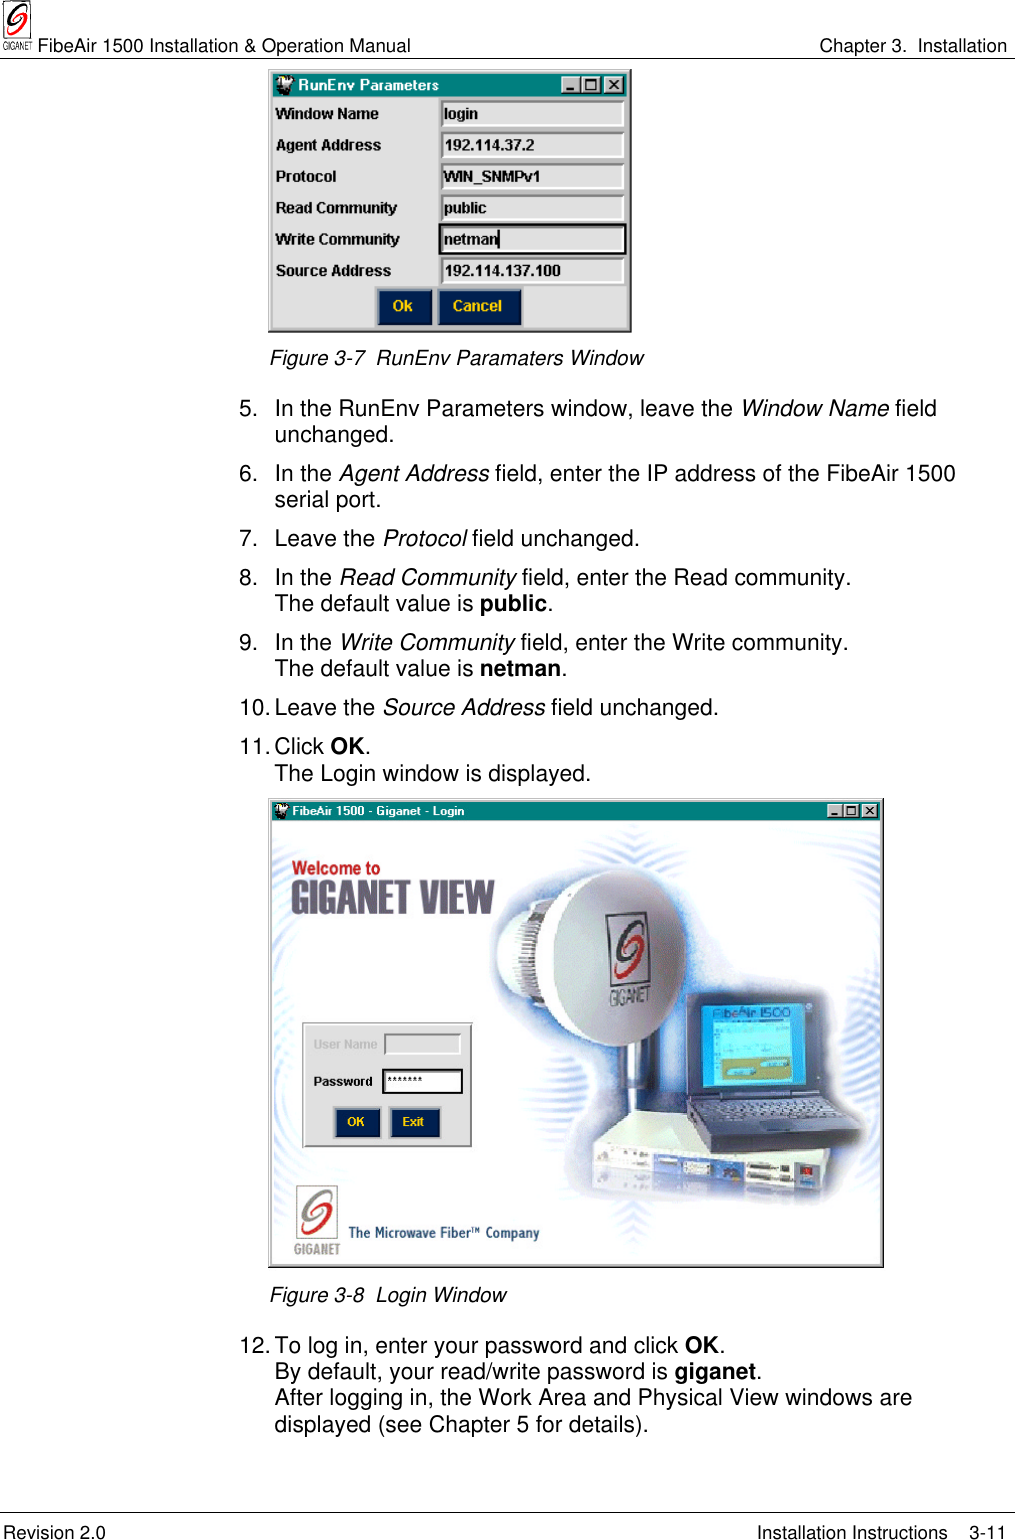  FibeAir 1500 Installation &amp; Operation Manual Chapter 3.  InstallationRevision 2.0 Installation Instructions 3-11Figure 3-7  RunEnv Paramaters Window5. In the RunEnv Parameters window, leave the Window Name fieldunchanged.6. In the Agent Address field, enter the IP address of the FibeAir 1500serial port.7. Leave the Protocol field unchanged.8. In the Read Community field, enter the Read community.The default value is public.9. In the Write Community field, enter the Write community.The default value is netman.10. Leave the Source Address field unchanged.11.Click OK.The Login window is displayed.Figure 3-8  Login Window12. To log in, enter your password and click OK.By default, your read/write password is giganet.After logging in, the Work Area and Physical View windows aredisplayed (see Chapter 5 for details).